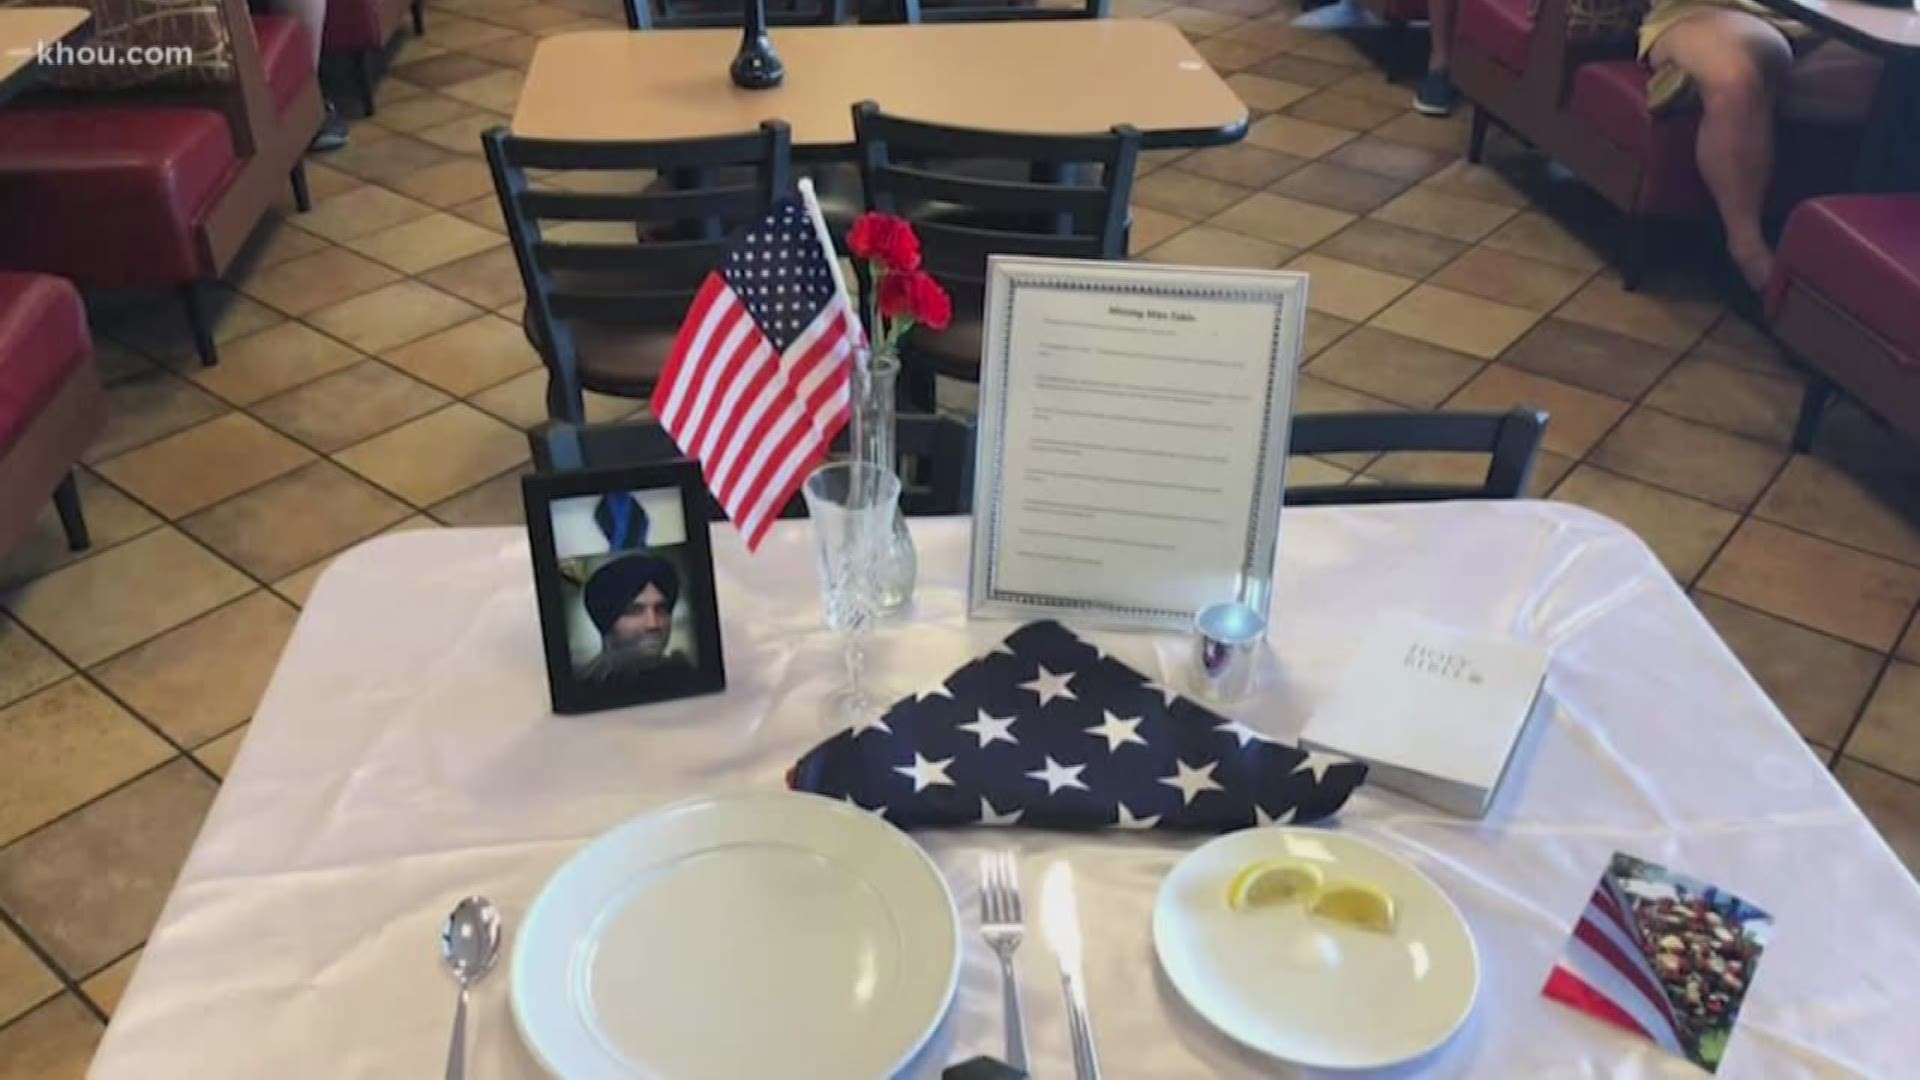 A Chick-fil-A in the Cypress area honored fallen Deputy Sandeep Dhaliwal by turning a table inside the restaurant into a memorial.